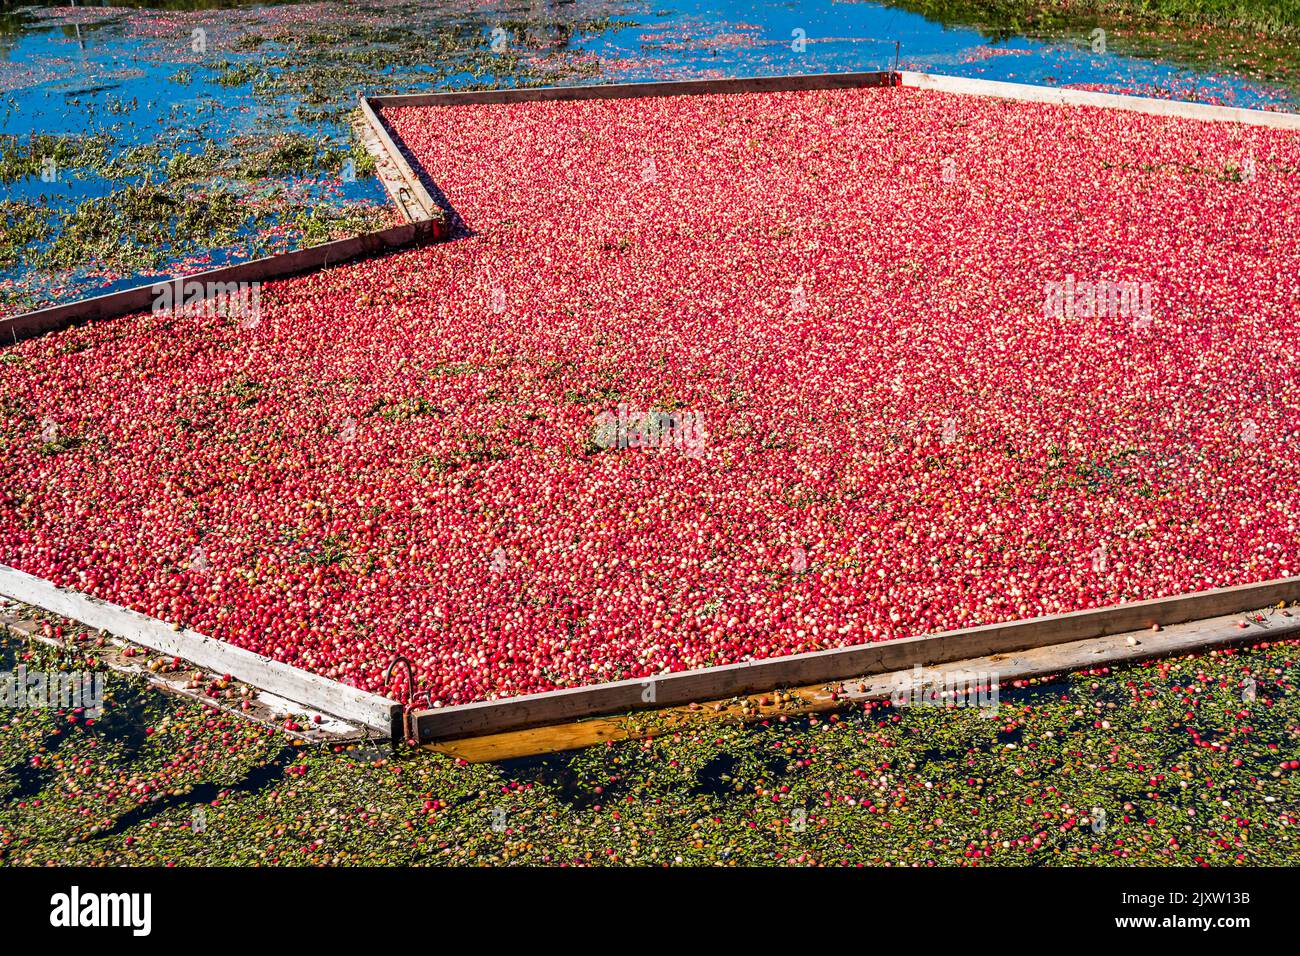 Cranberry harvest at a cranberry bog in Ontario, Canada Stock Photo